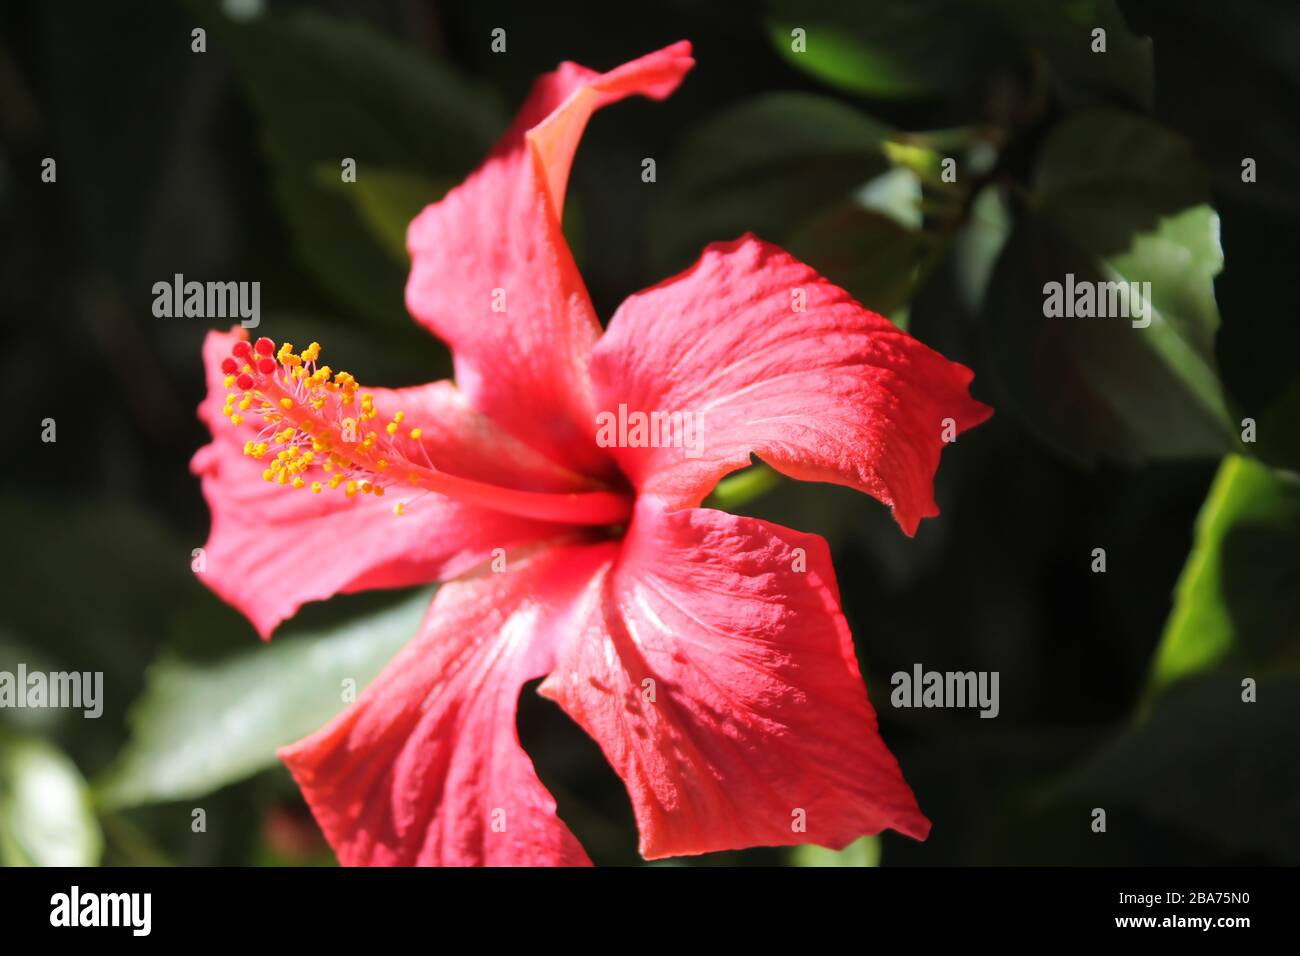 Hibiscus is a genus of flowering plants in the mallow family. Stock Photo